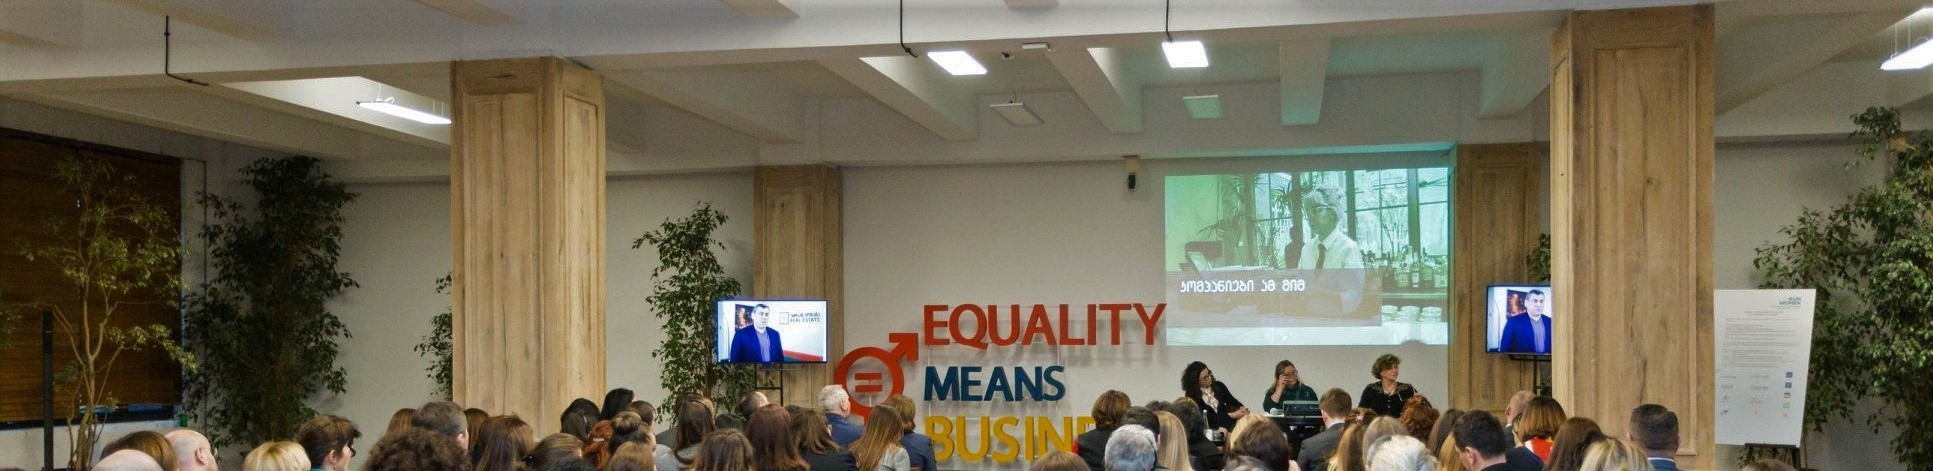 Business Leadership for Women’s Empowerment in Georgia 